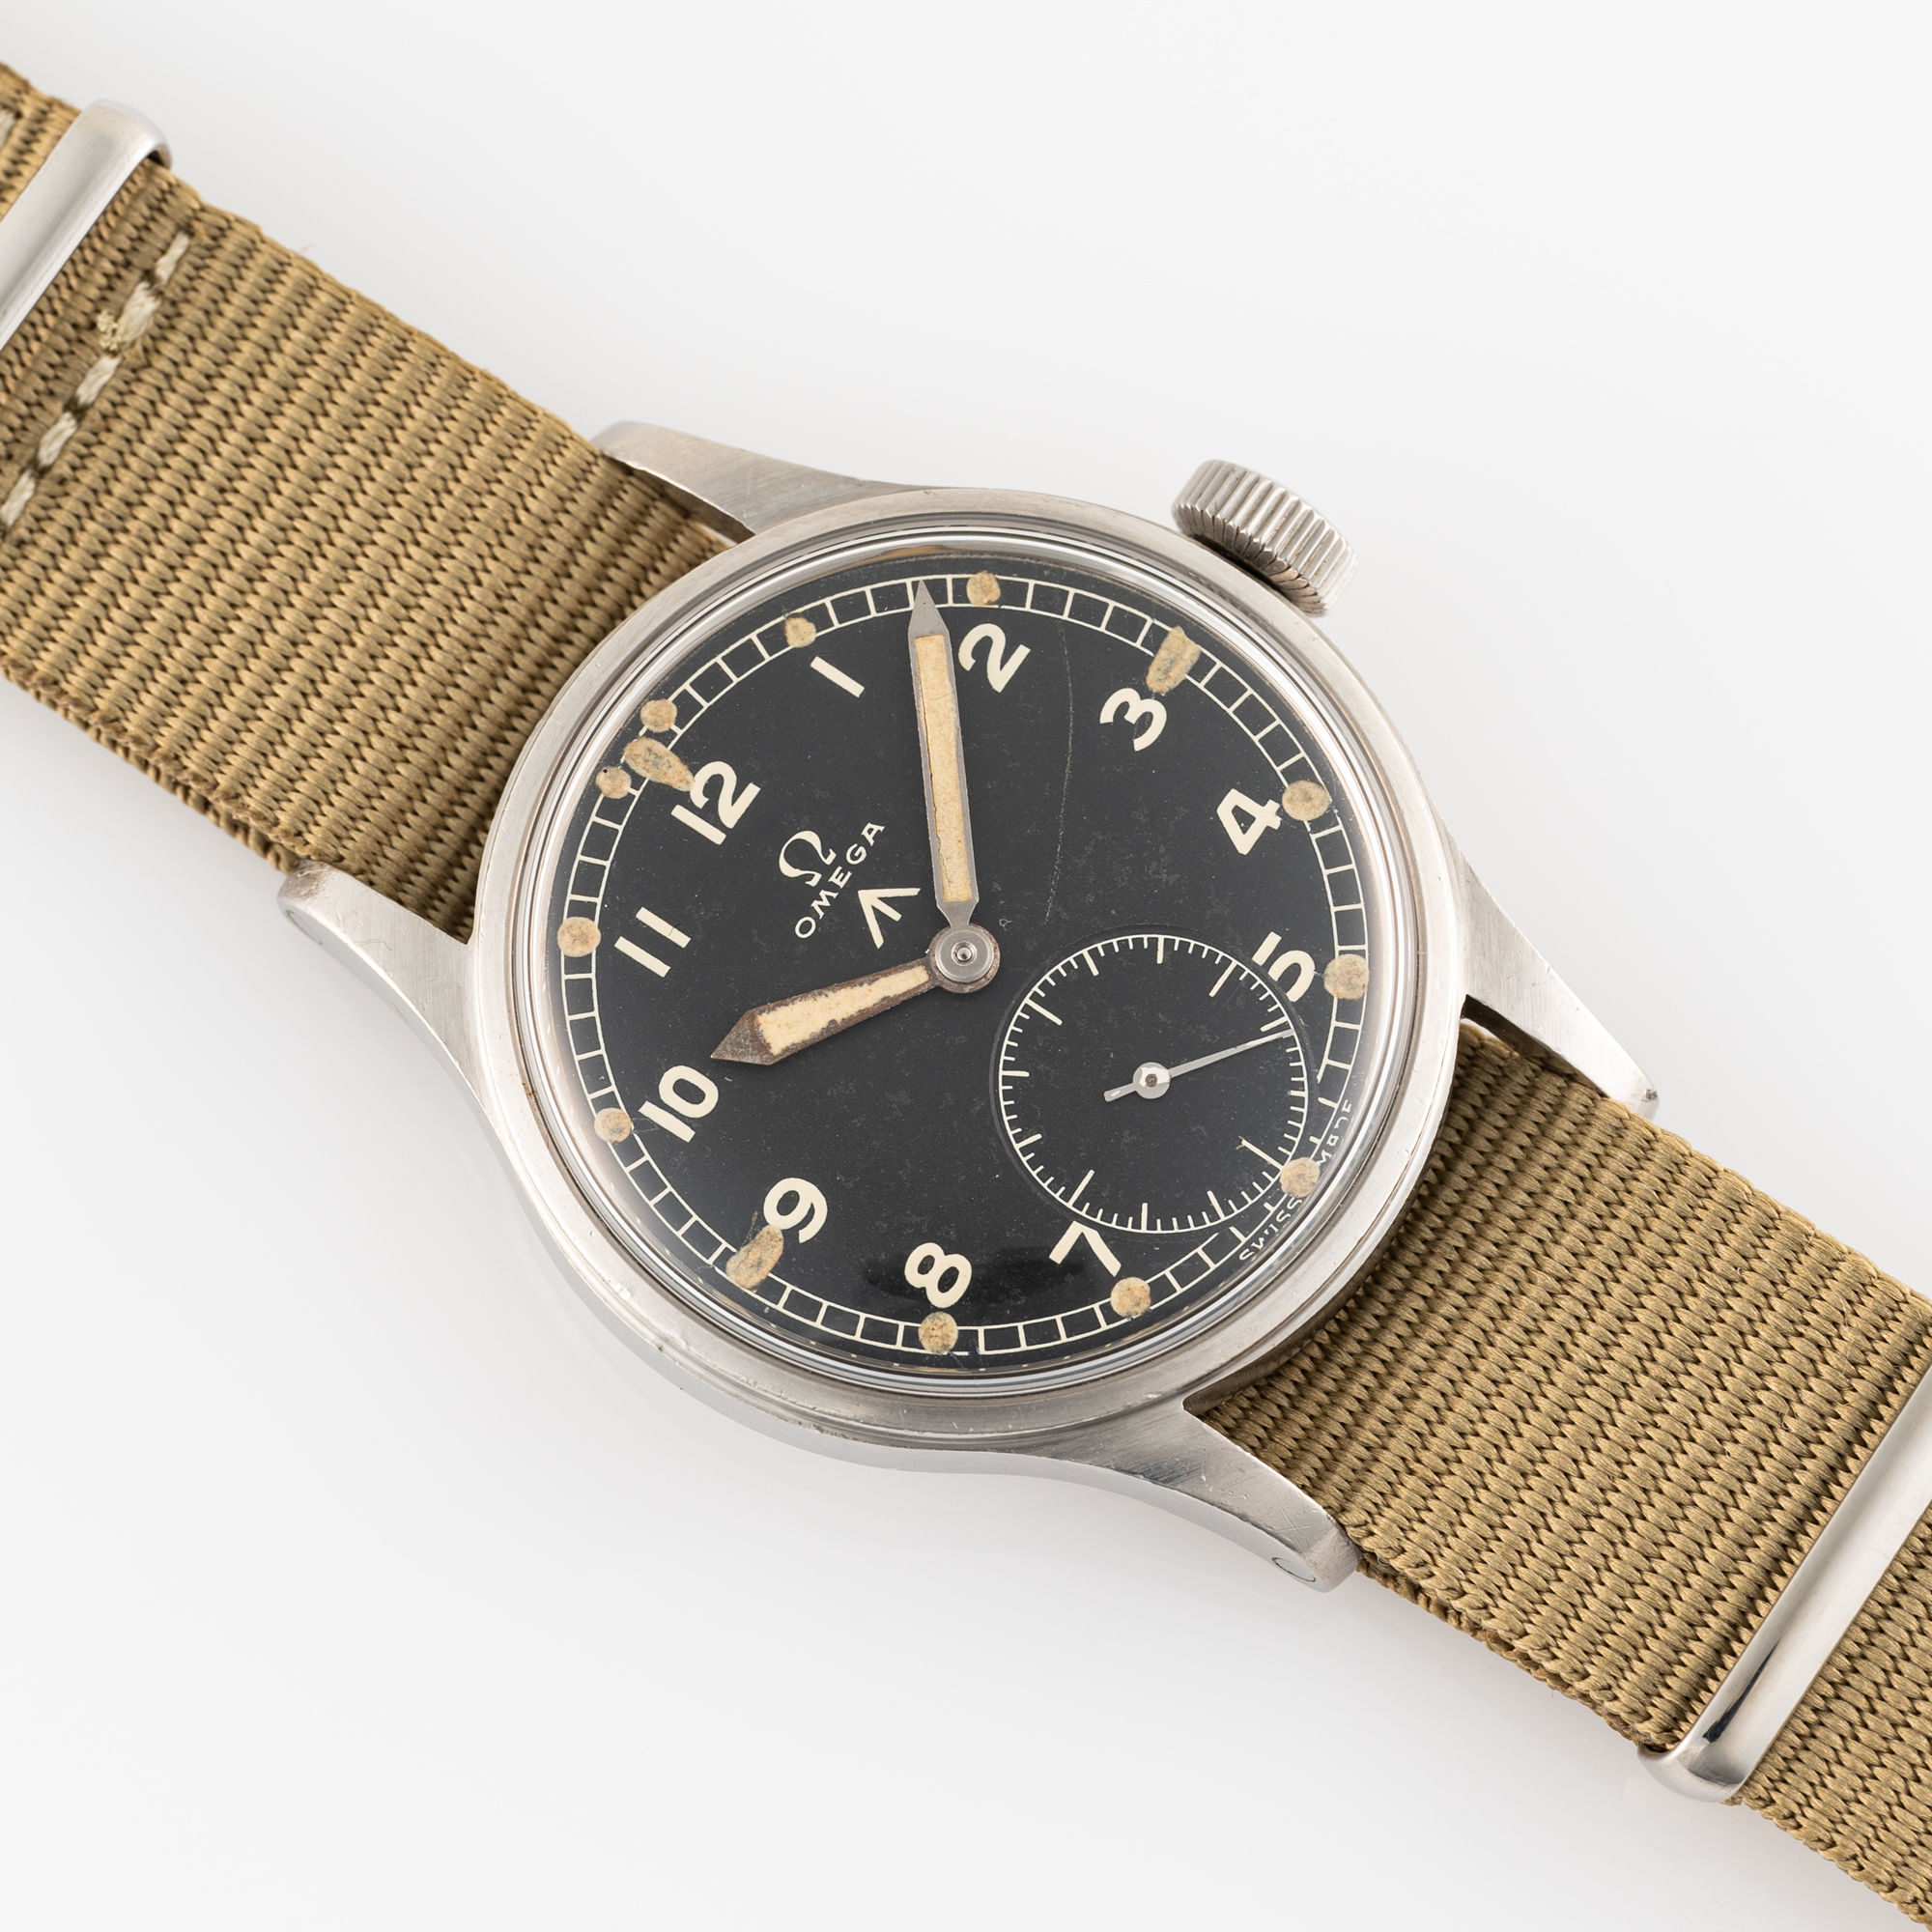 A GENTLEMAN'S STAINLESS STEEL BRITISH MILITARY OMEGA W.W.W. WRIST WATCH CIRCA 1945, PART OF THE " - Image 3 of 8